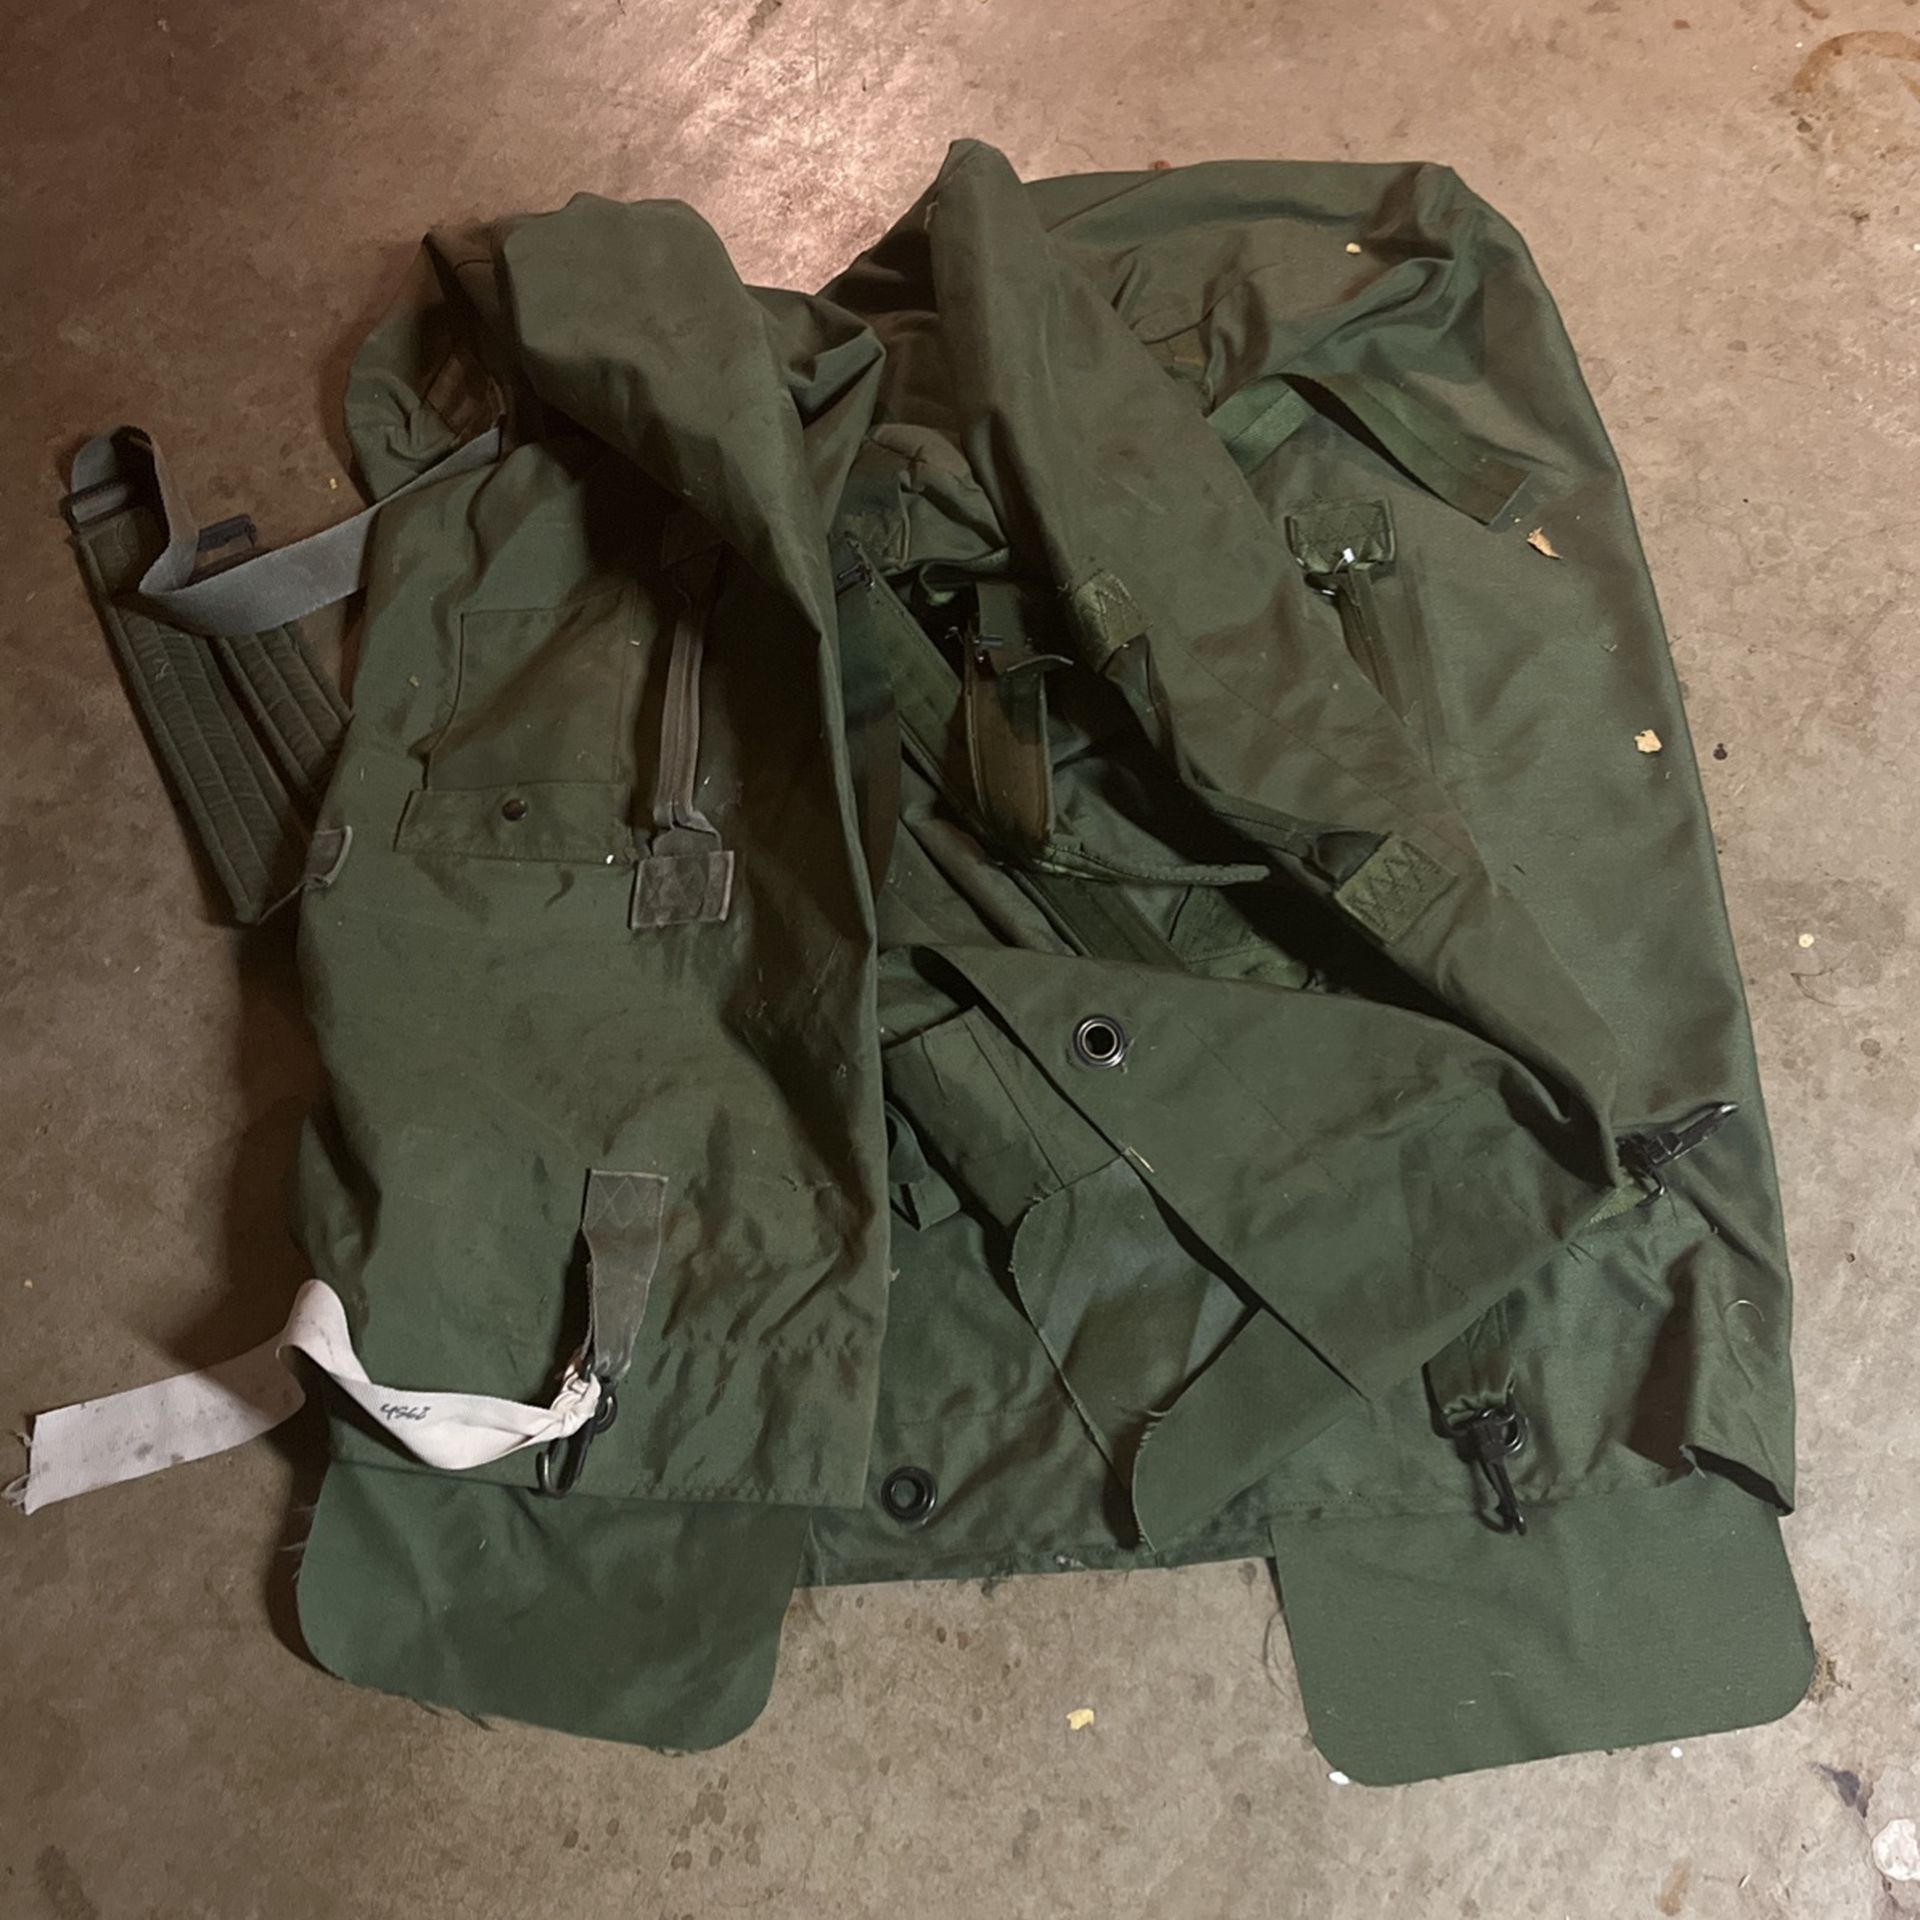 3 Army Duffle Bags